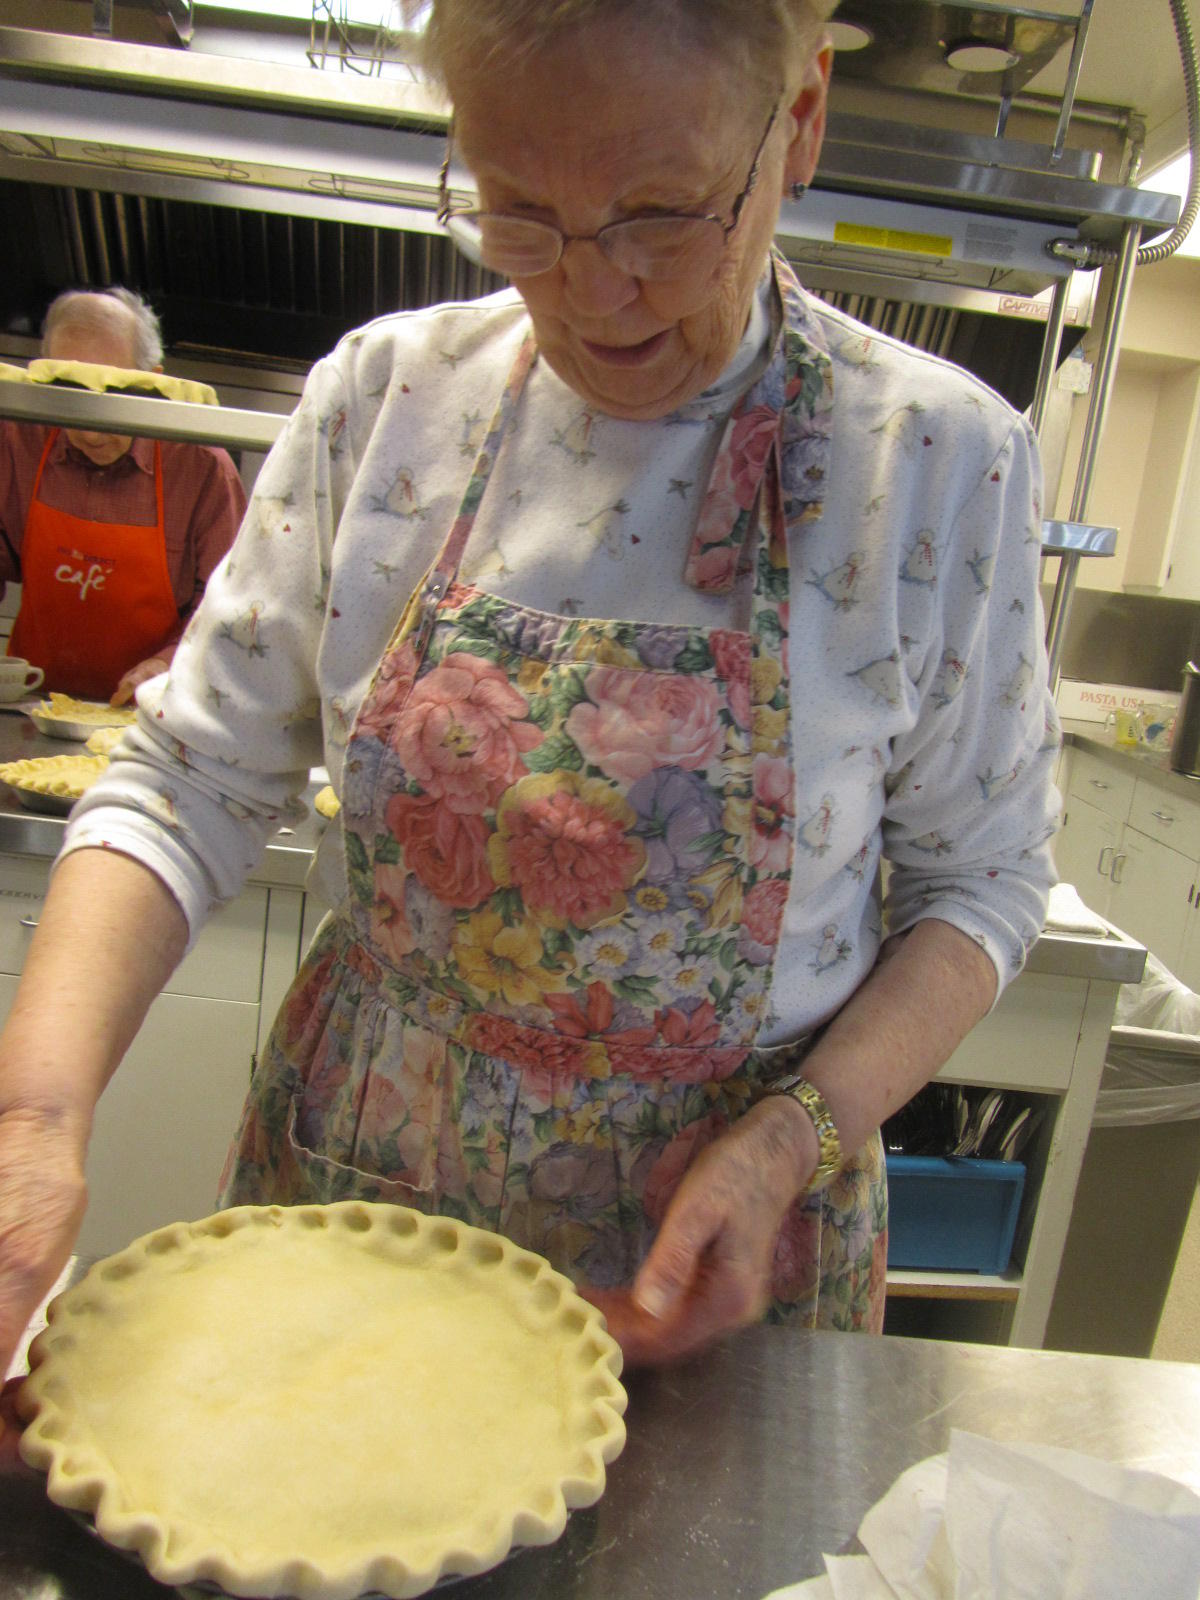 Fellowship And Tradition Go Into Pie Making For Lent In Boise Boise 9946